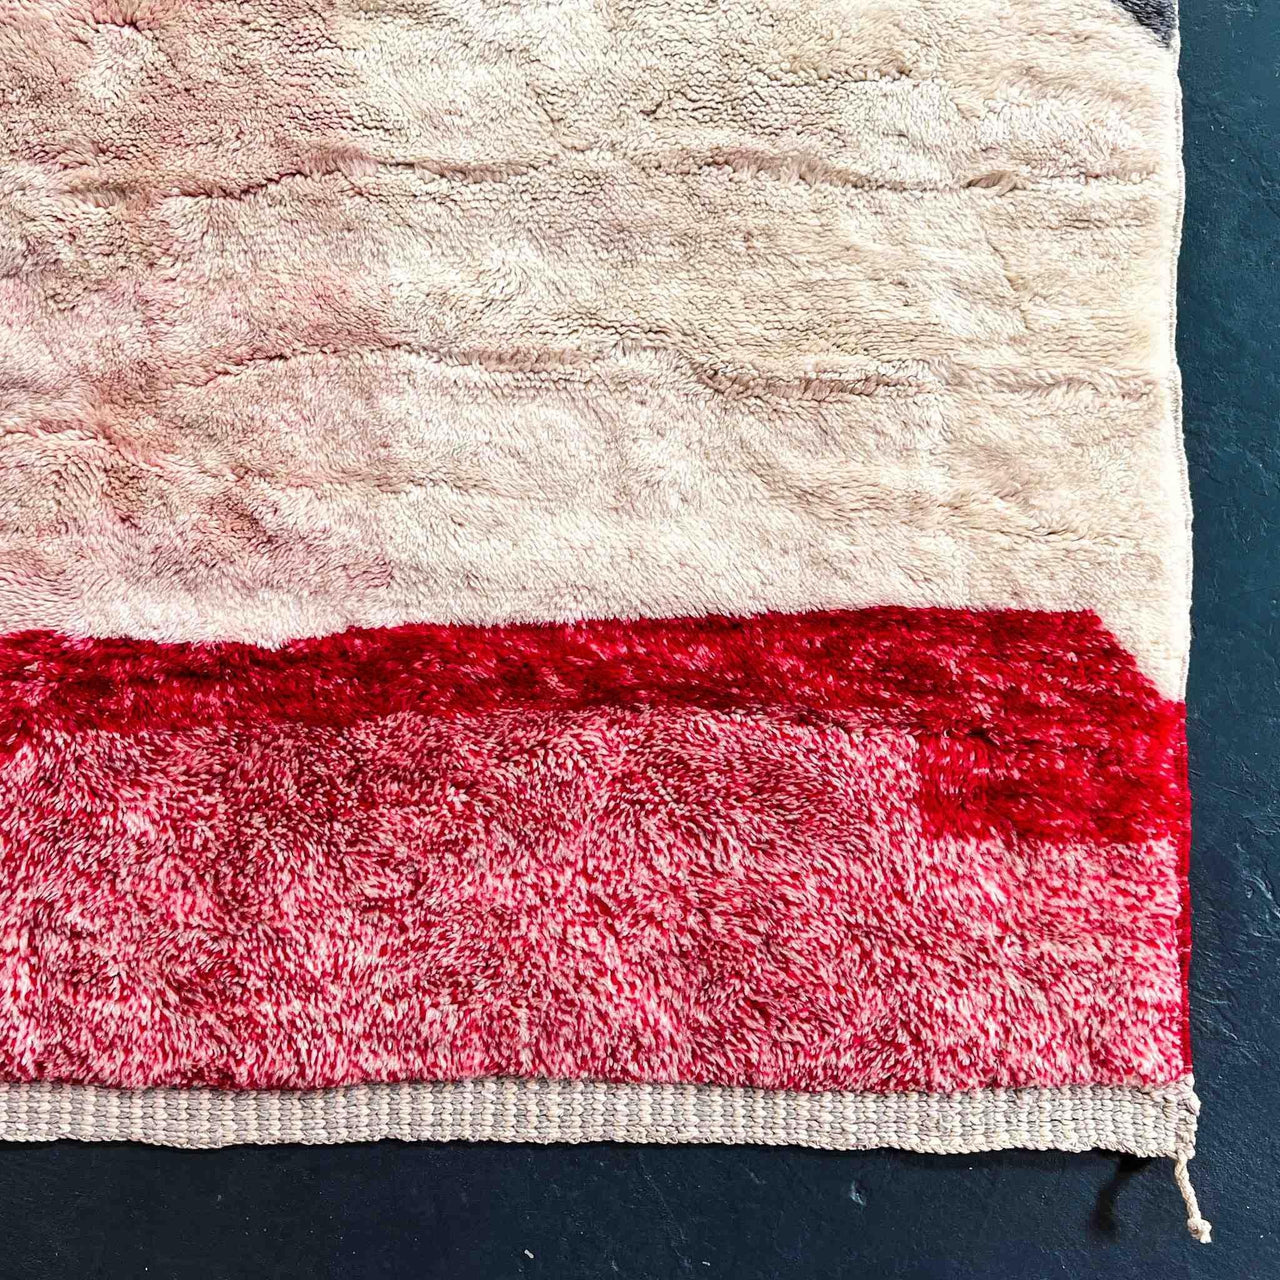 Add a touch of elegance to your home with the Rosy Abstract Handwoven 100% Wool Beni Mrirt Rug, a classic Beni Ourain rug measuring 8.1 X 9.9 ft / 247 X 304 cm. This handcrafted rug features a beautiful abstract design and luxurious wool texture.